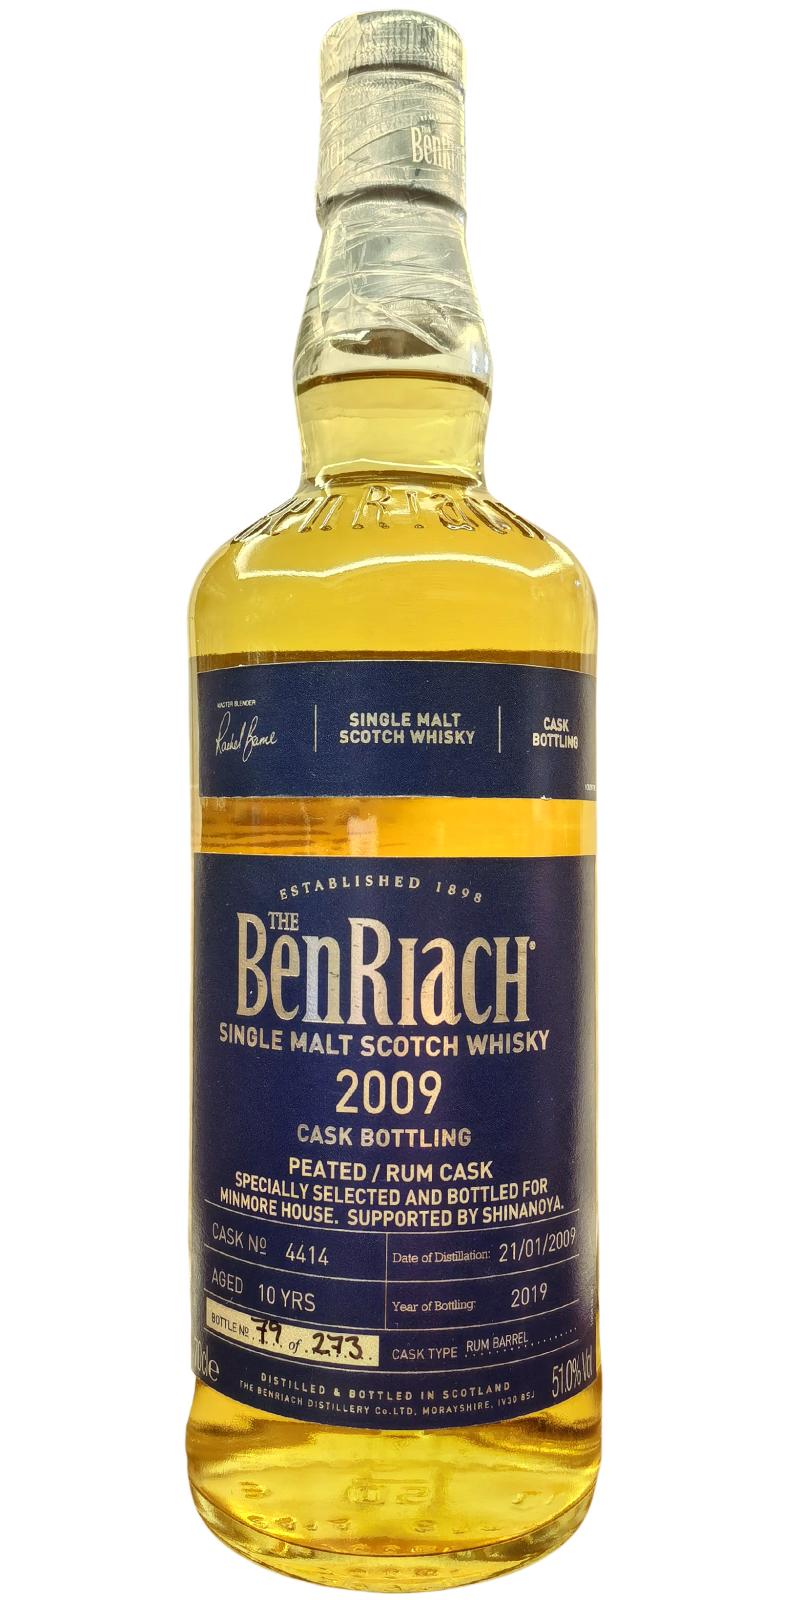 BenRiach 2009 Rum Barrel #4414 Minmore House supported by Shinanoya 51% 700ml